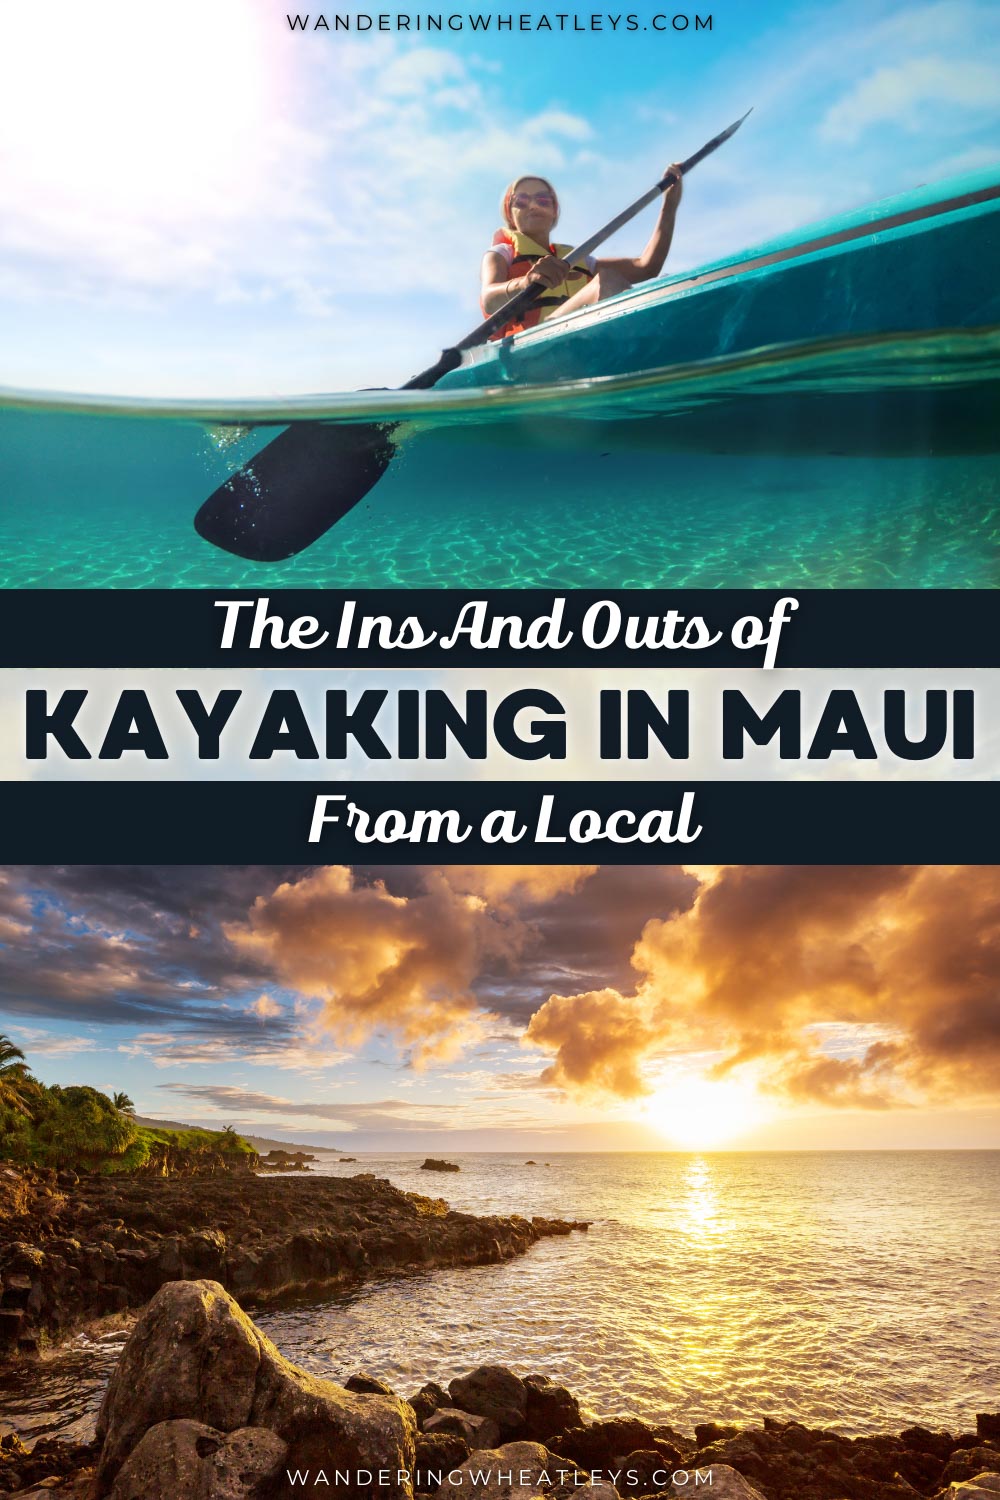 Guide to Kayaking in Maui